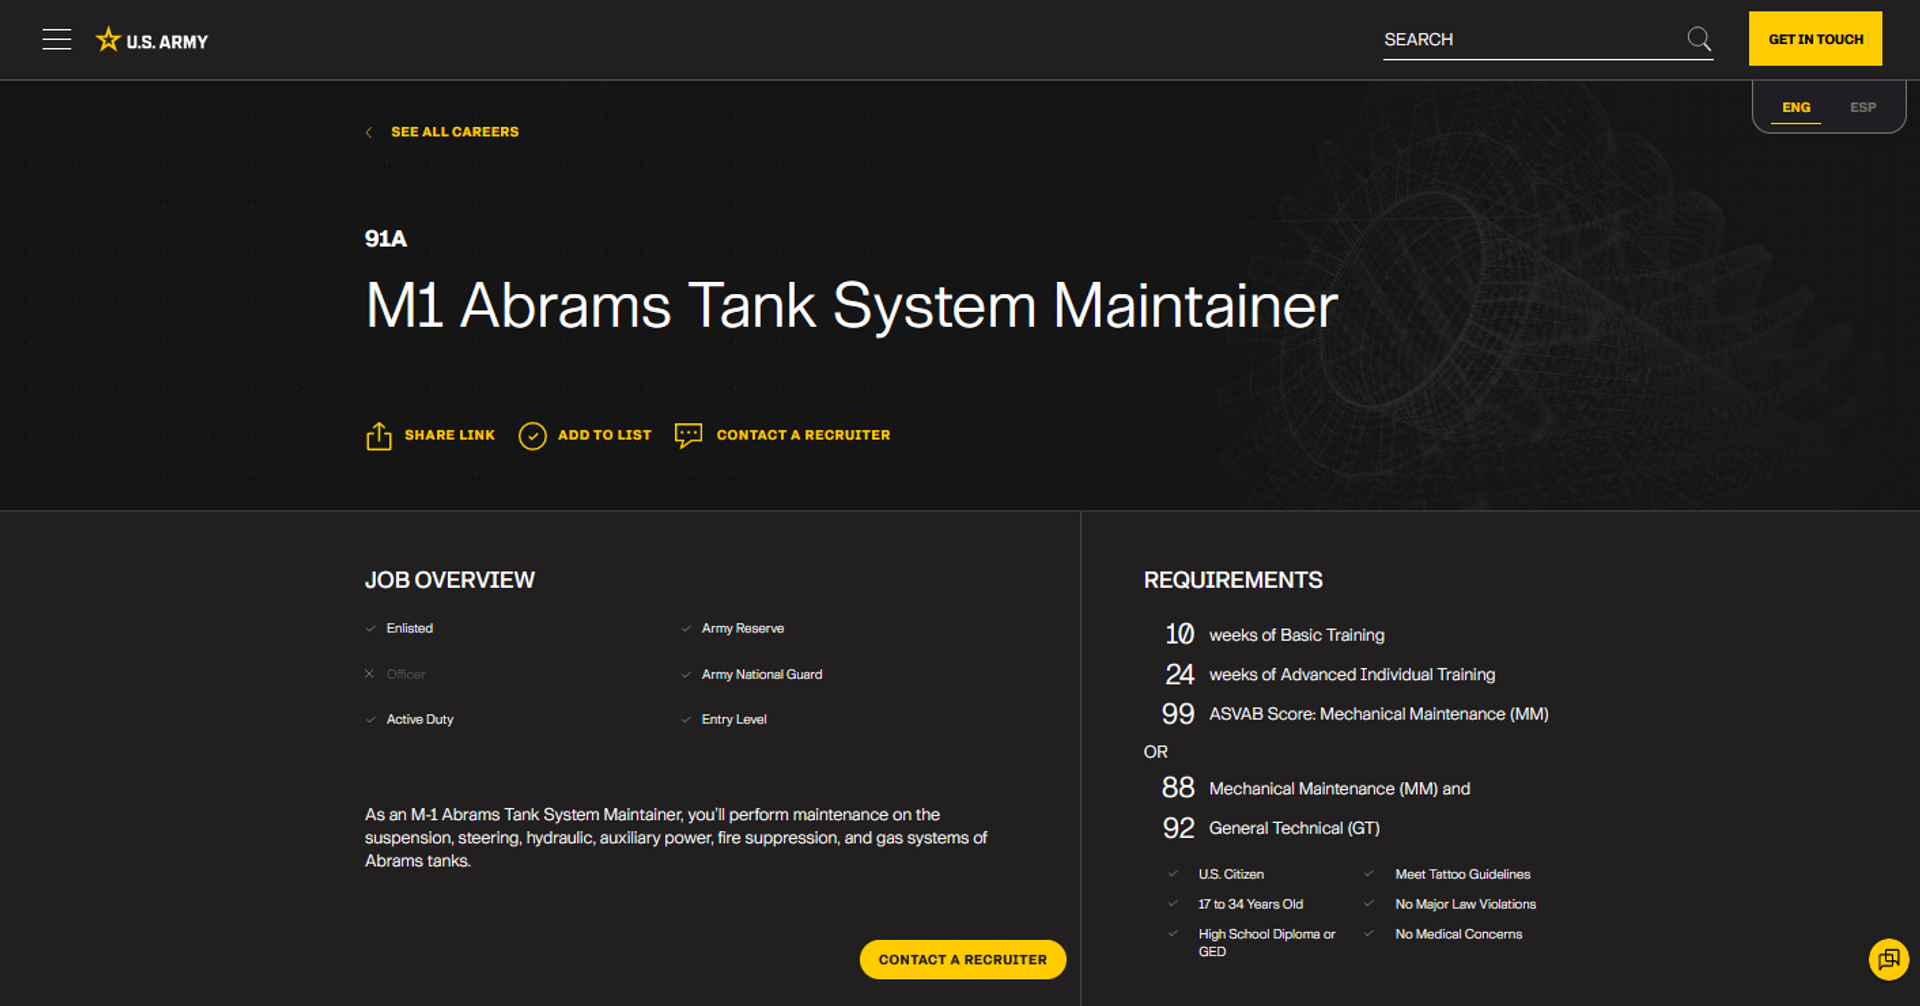 Screenshot of US Army website listing requirements for the position of M1 Abrams Tank System Maintainer. - Sputnik International, 1920, 28.09.2023